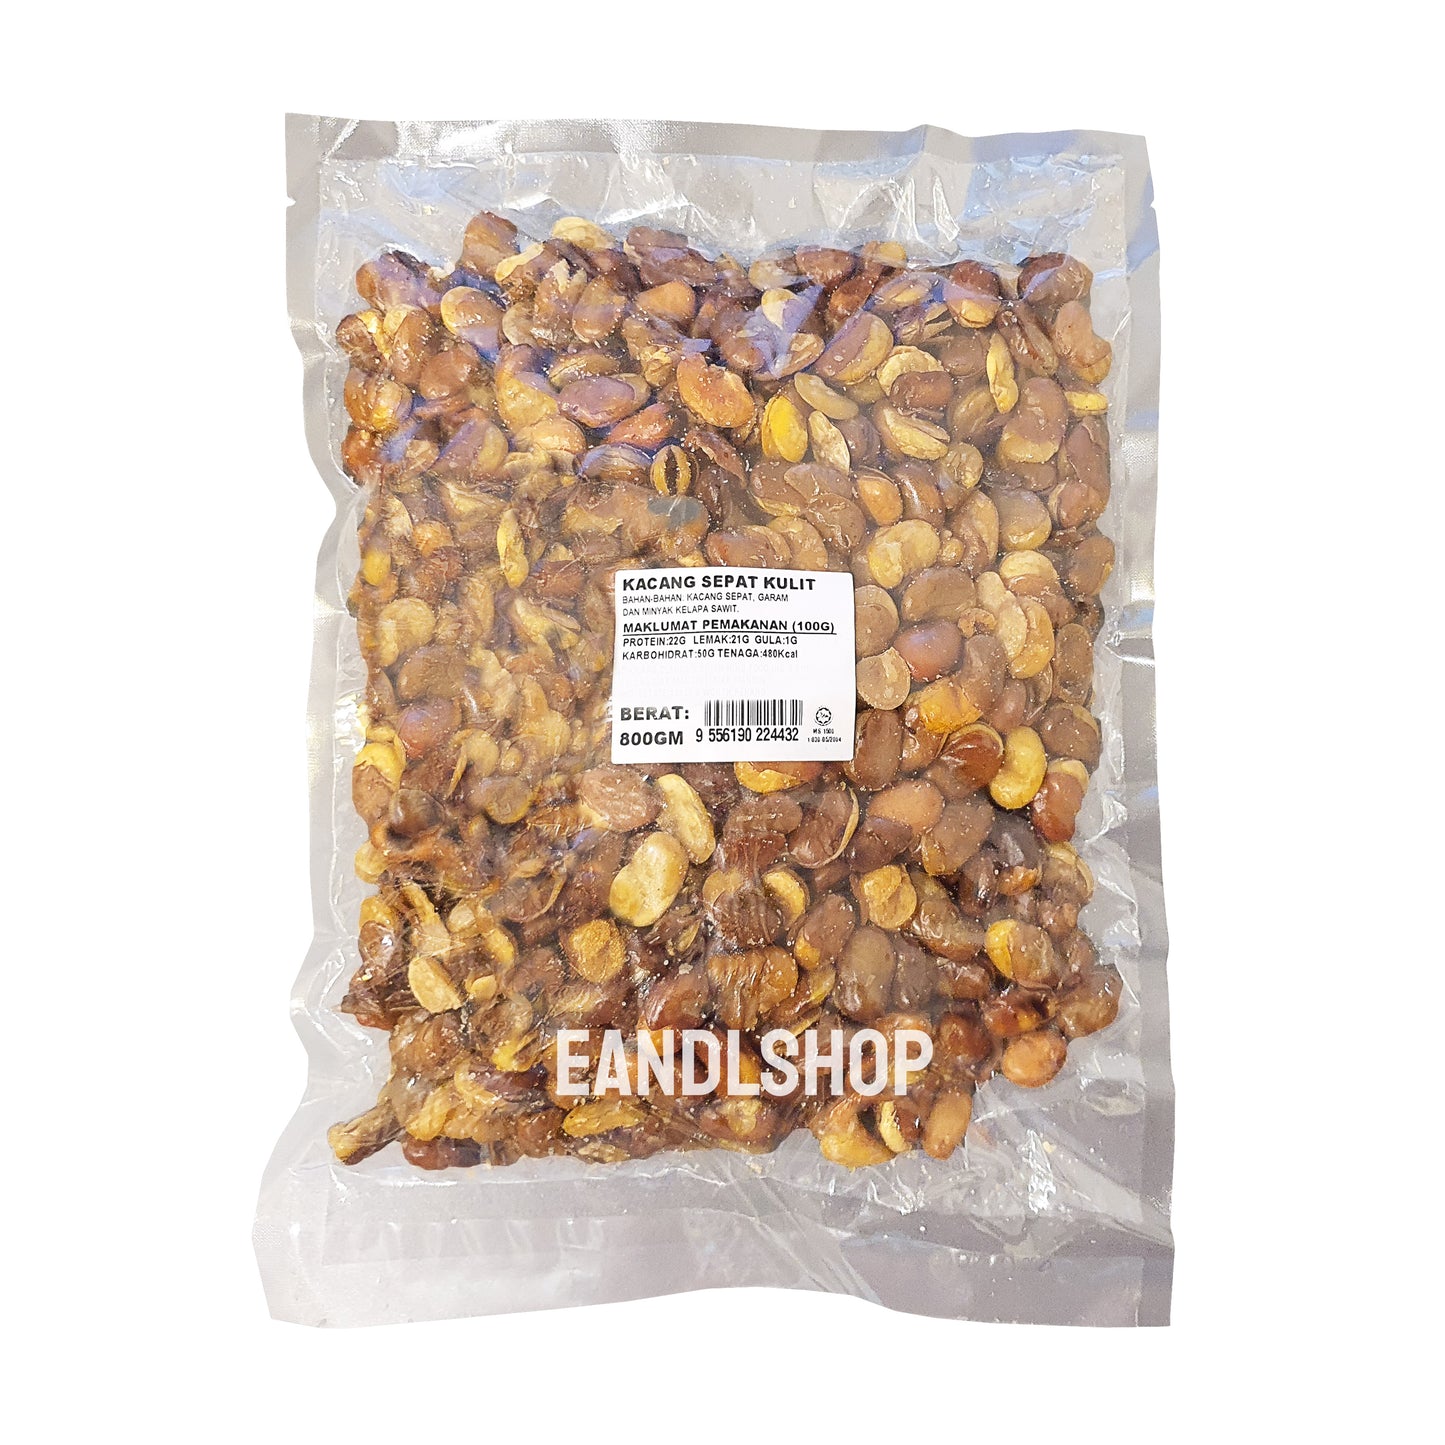 Broad Beans with Skin. Old-school biscuits, modern snacks (chips, crackers), cakes, gummies, plums, dried fruits, nuts, herbal tea – available at www.EANDLSHOP.com